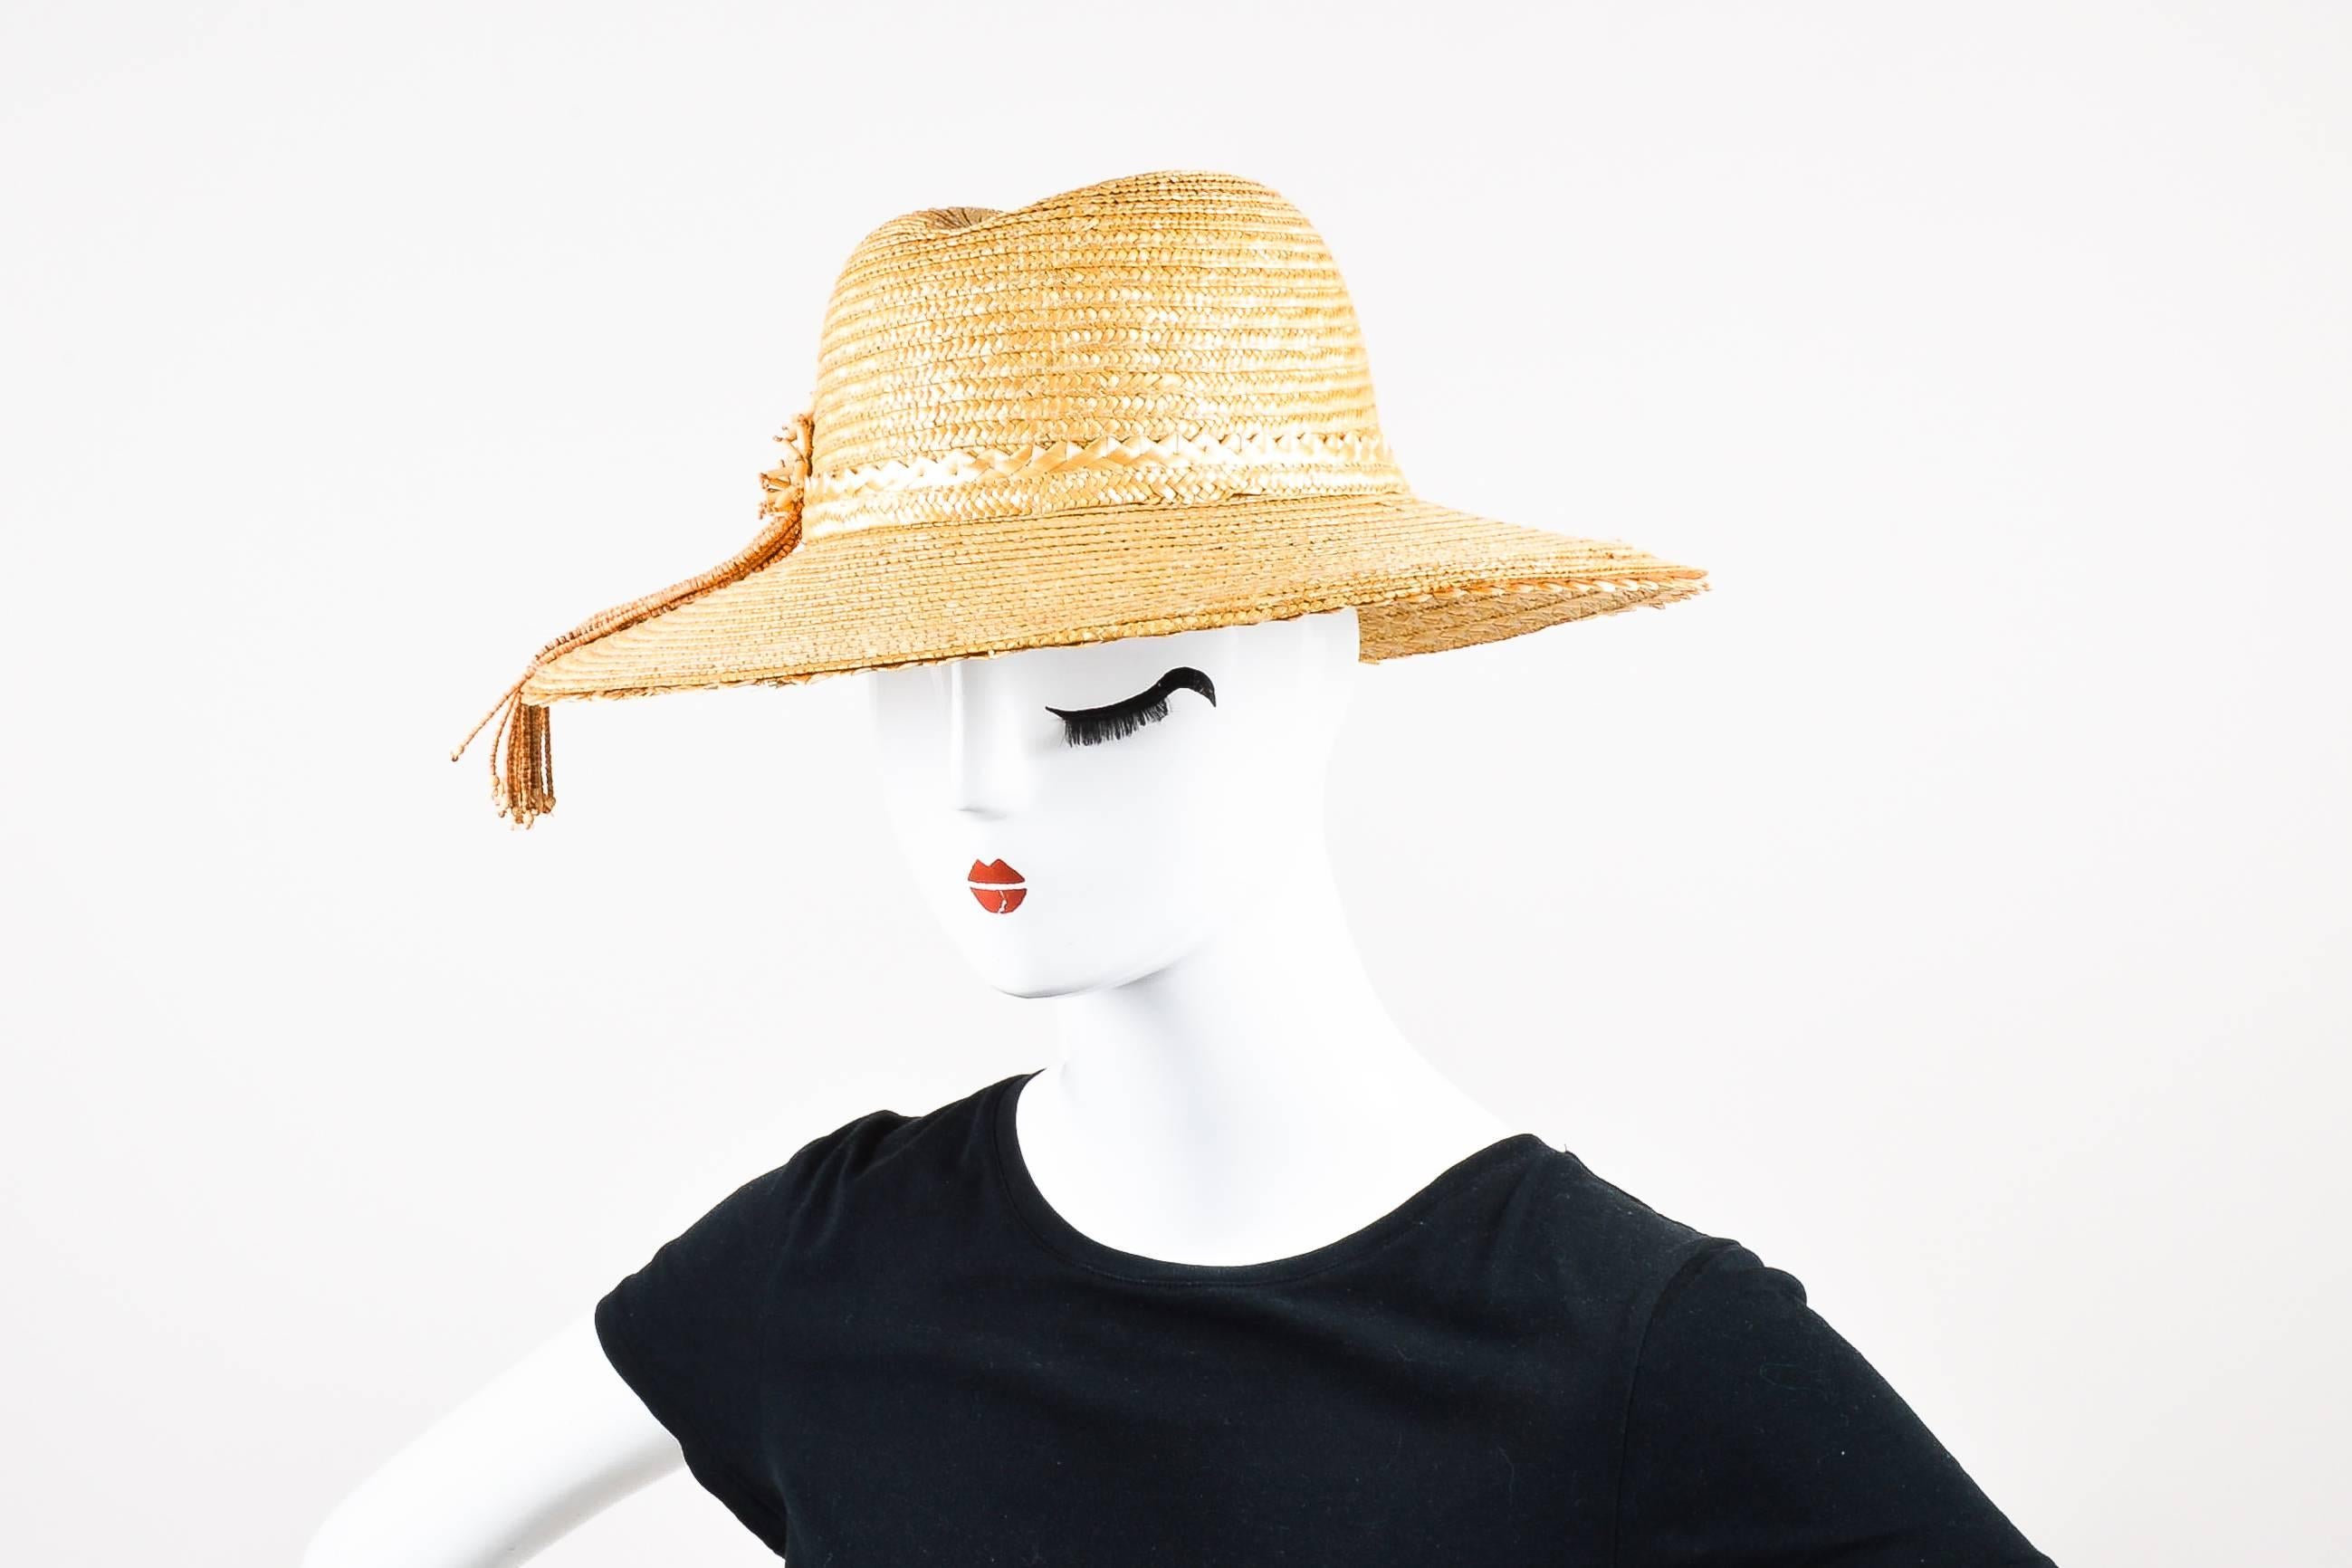 Golden yellow woven straw hat. Tan wood bead fringe details.

Fabric Content: 100% Straw

Measurements:
Total Width: 14.5